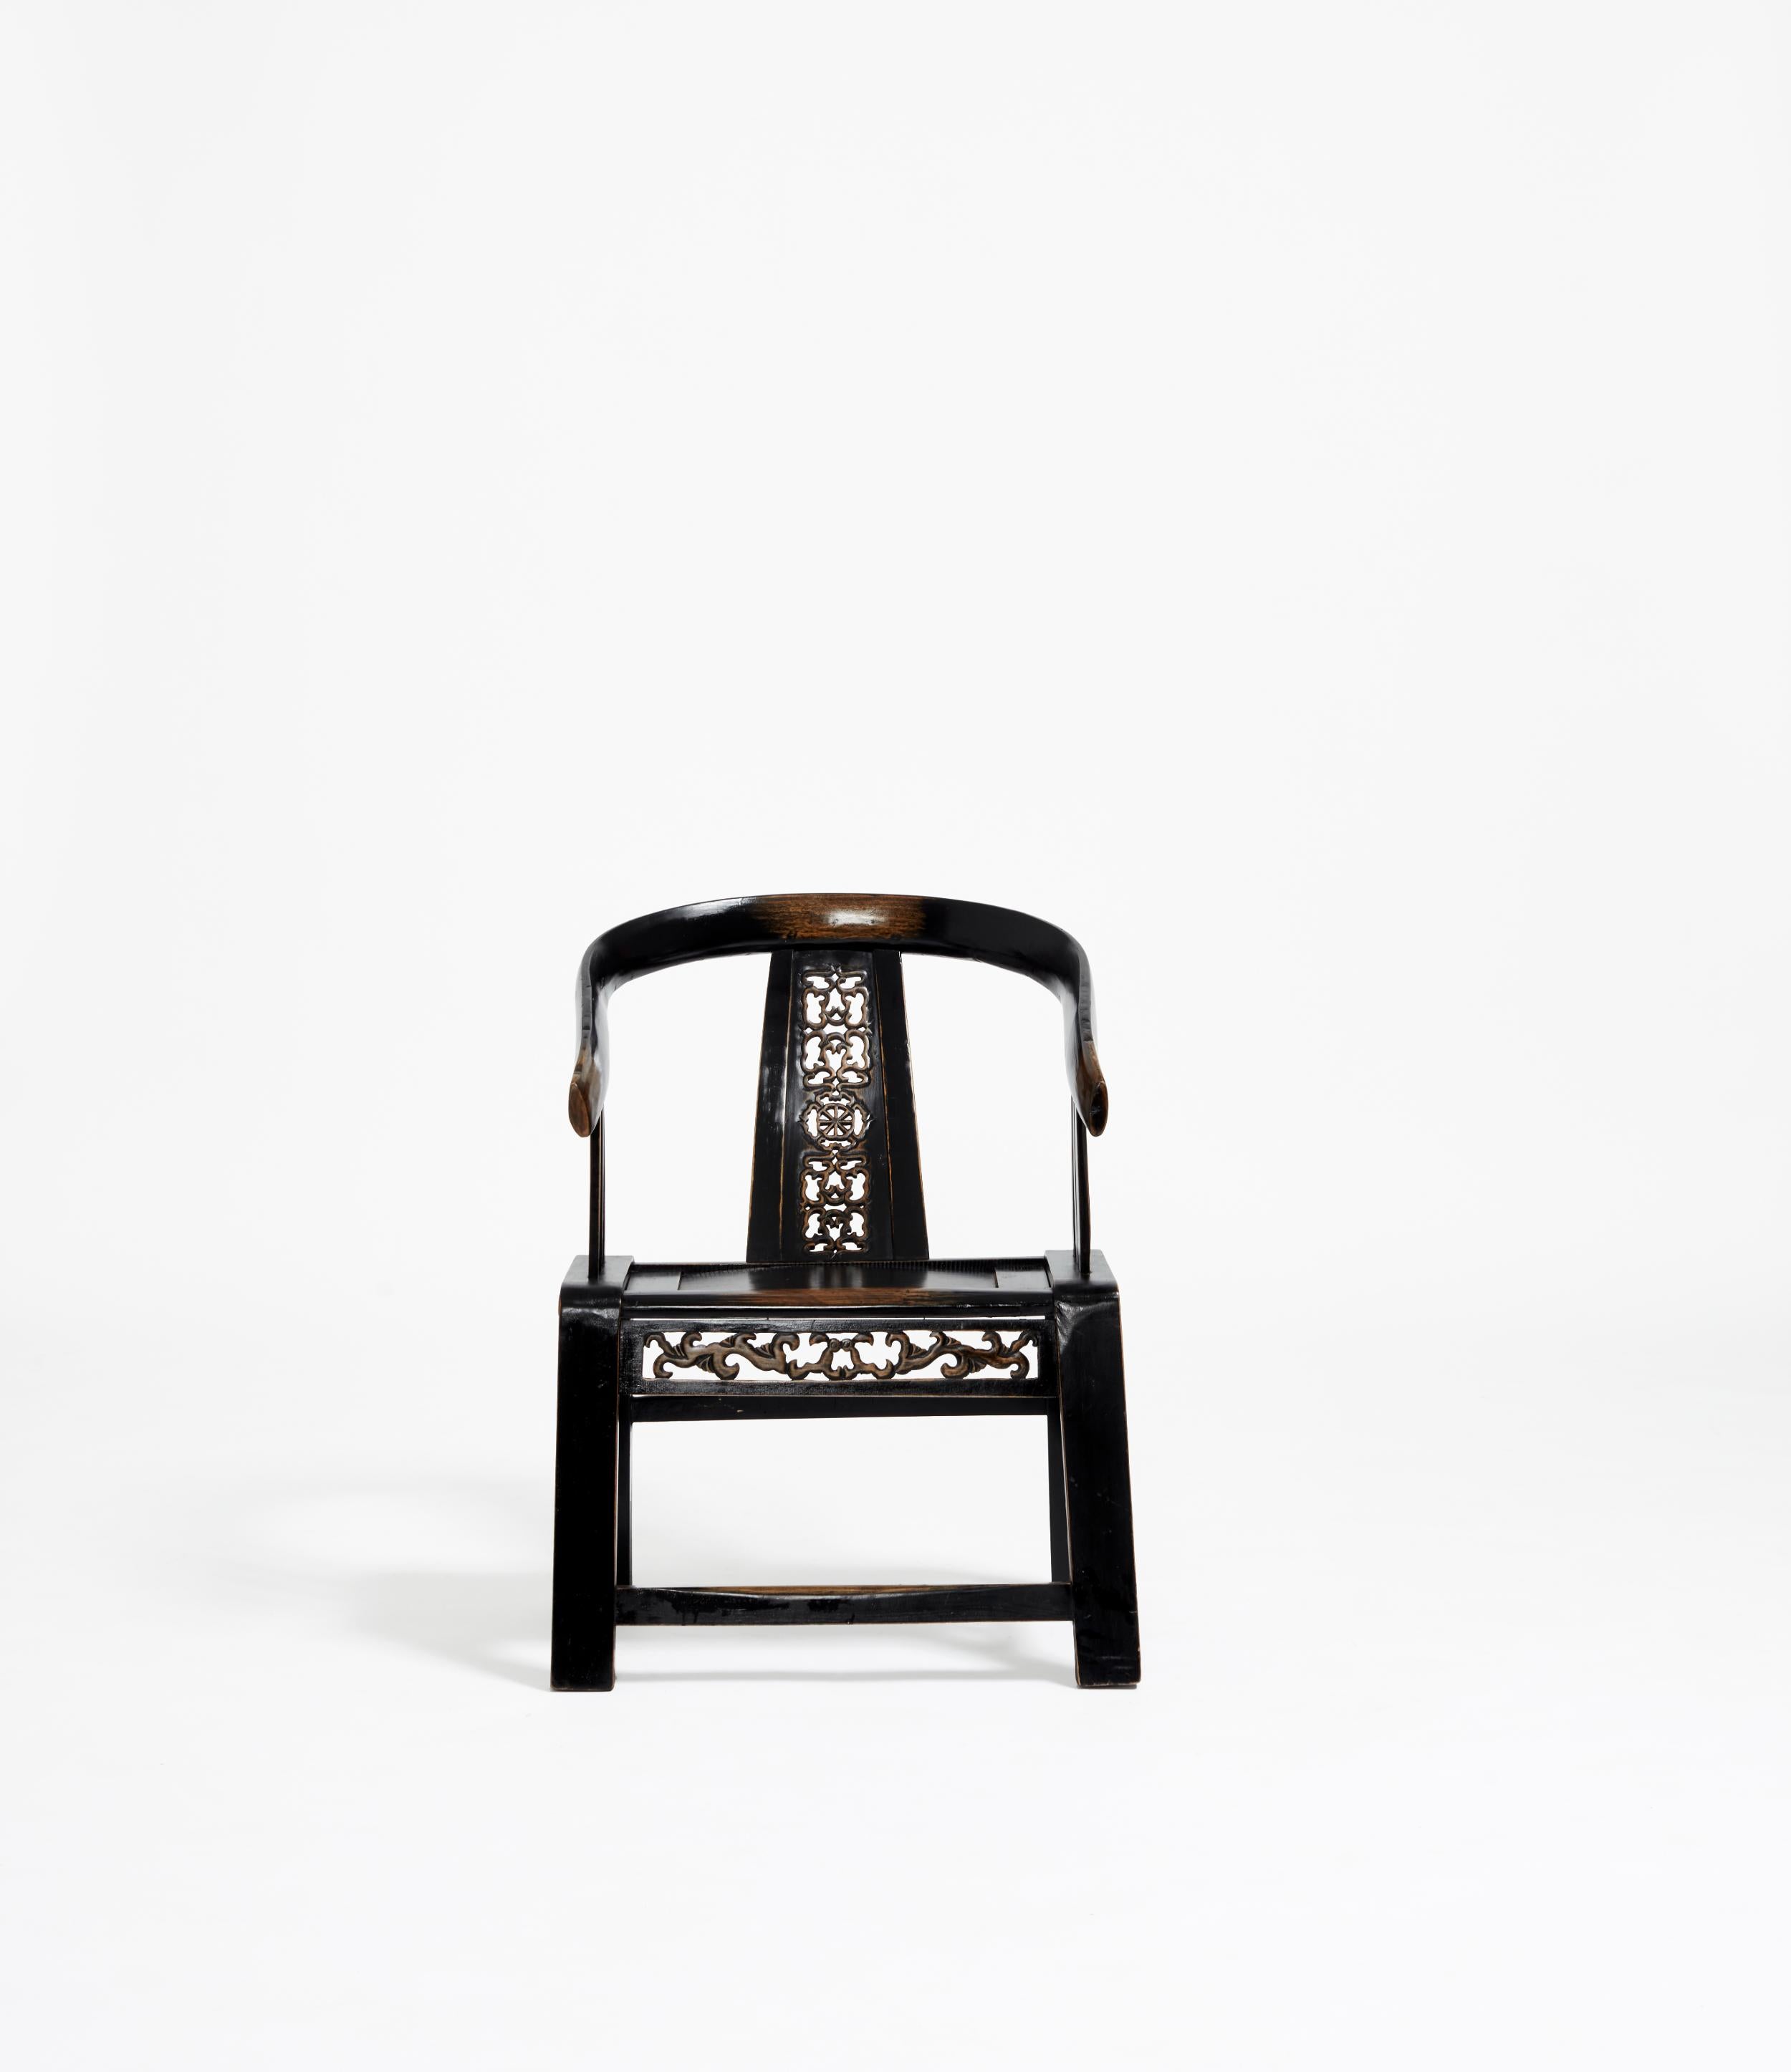 This huanghuali chair from the Ming dynasty is a revised iteration from the previous Song dyntasty; in which archaistic expressions were drawn upon as historical reference embedded within the design.